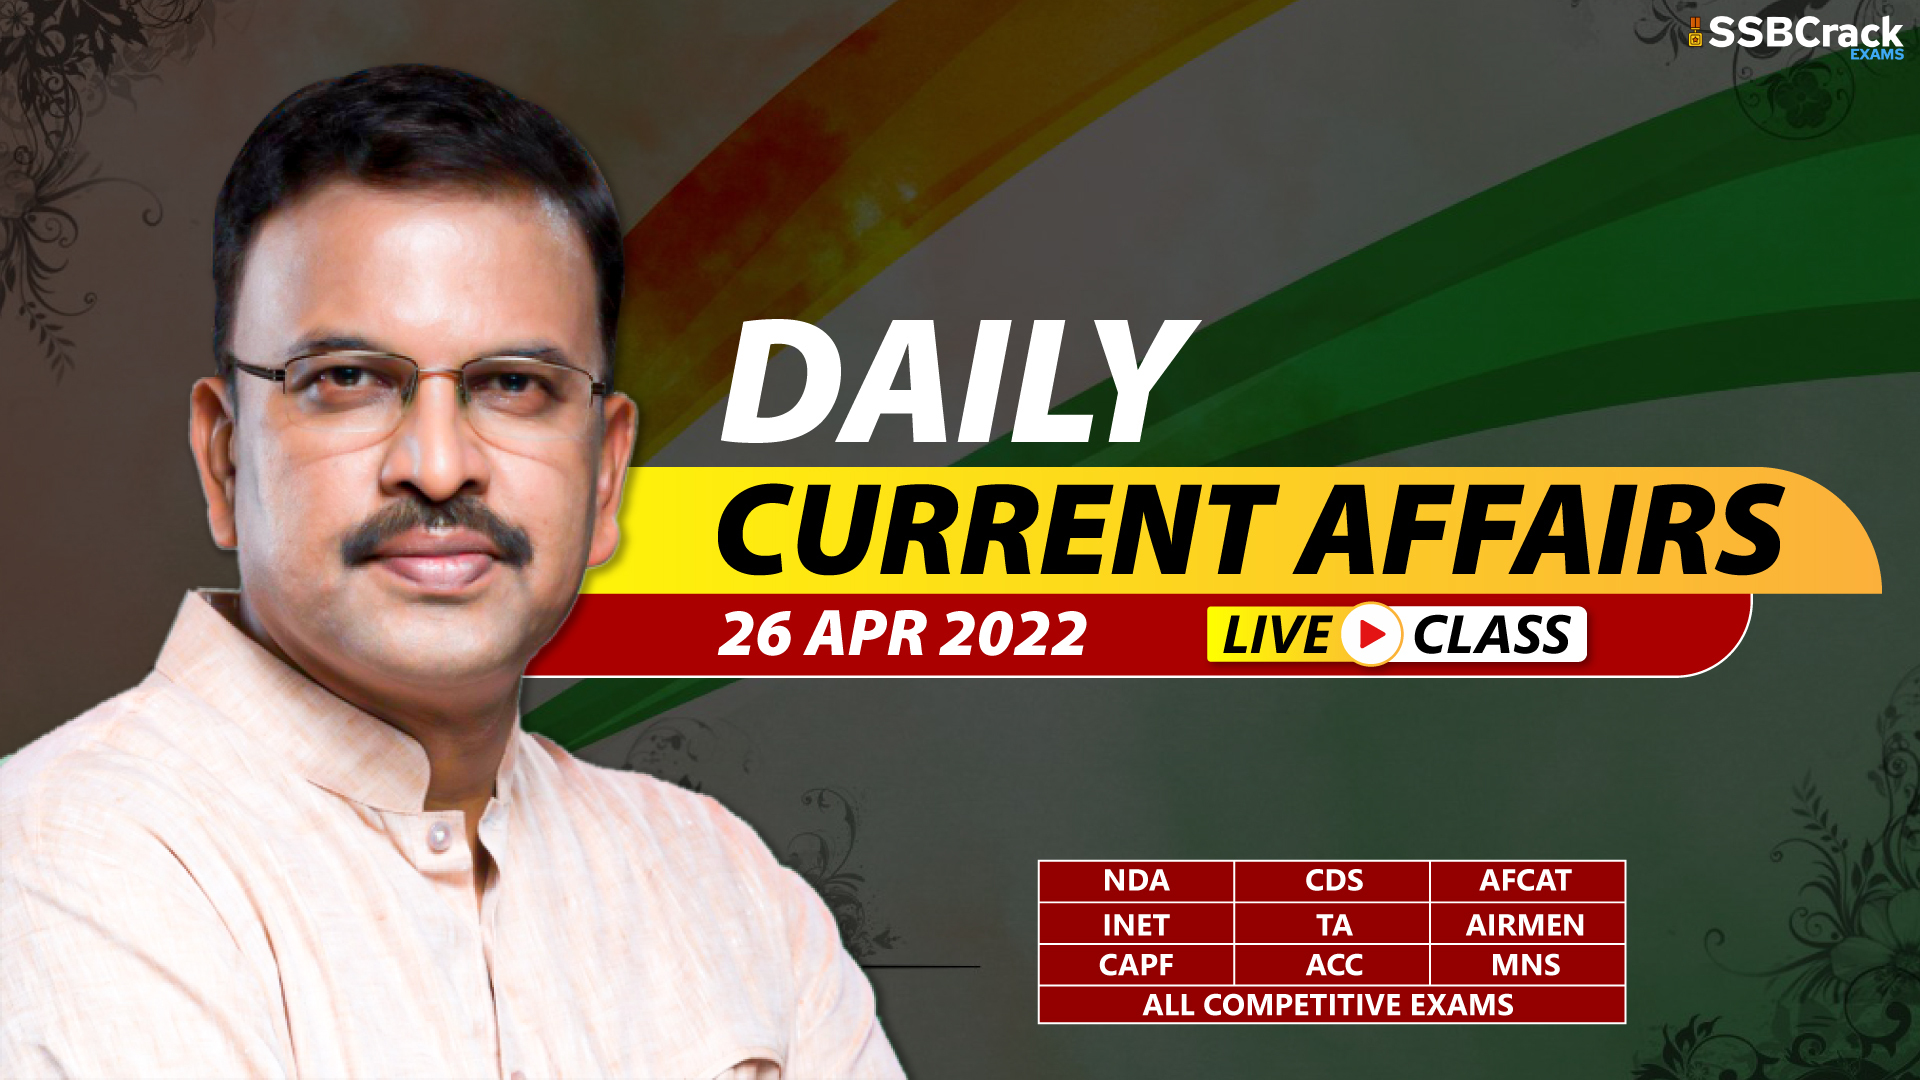 26 April 2022 Daily Current Affairs With Video Lecture Download Pdf 7095